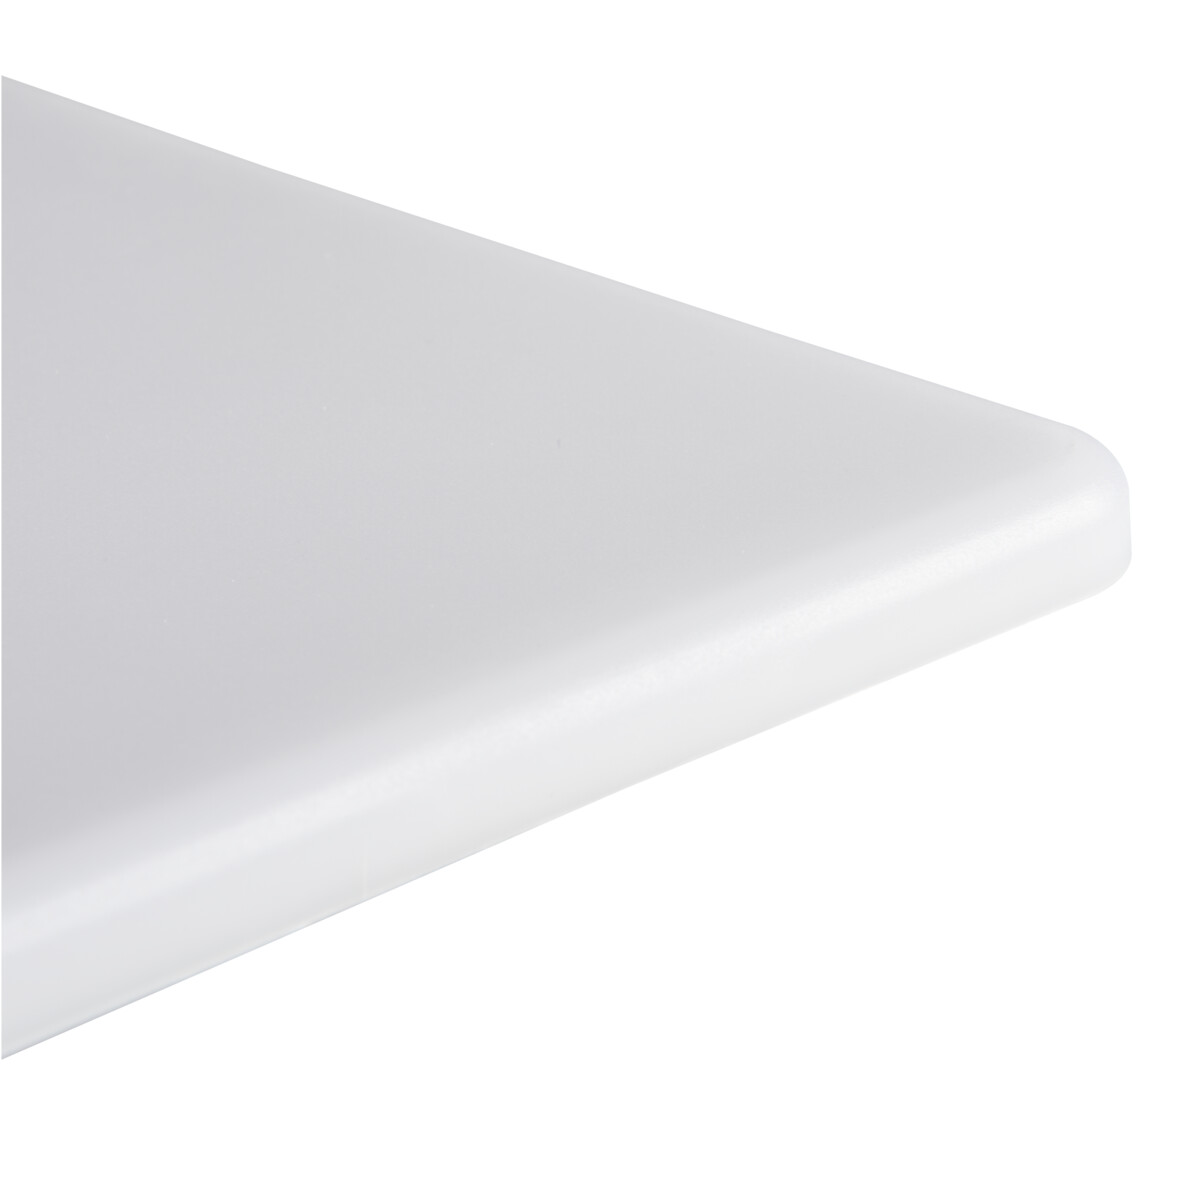 AREL LED DL 10W-NW - KANLUX